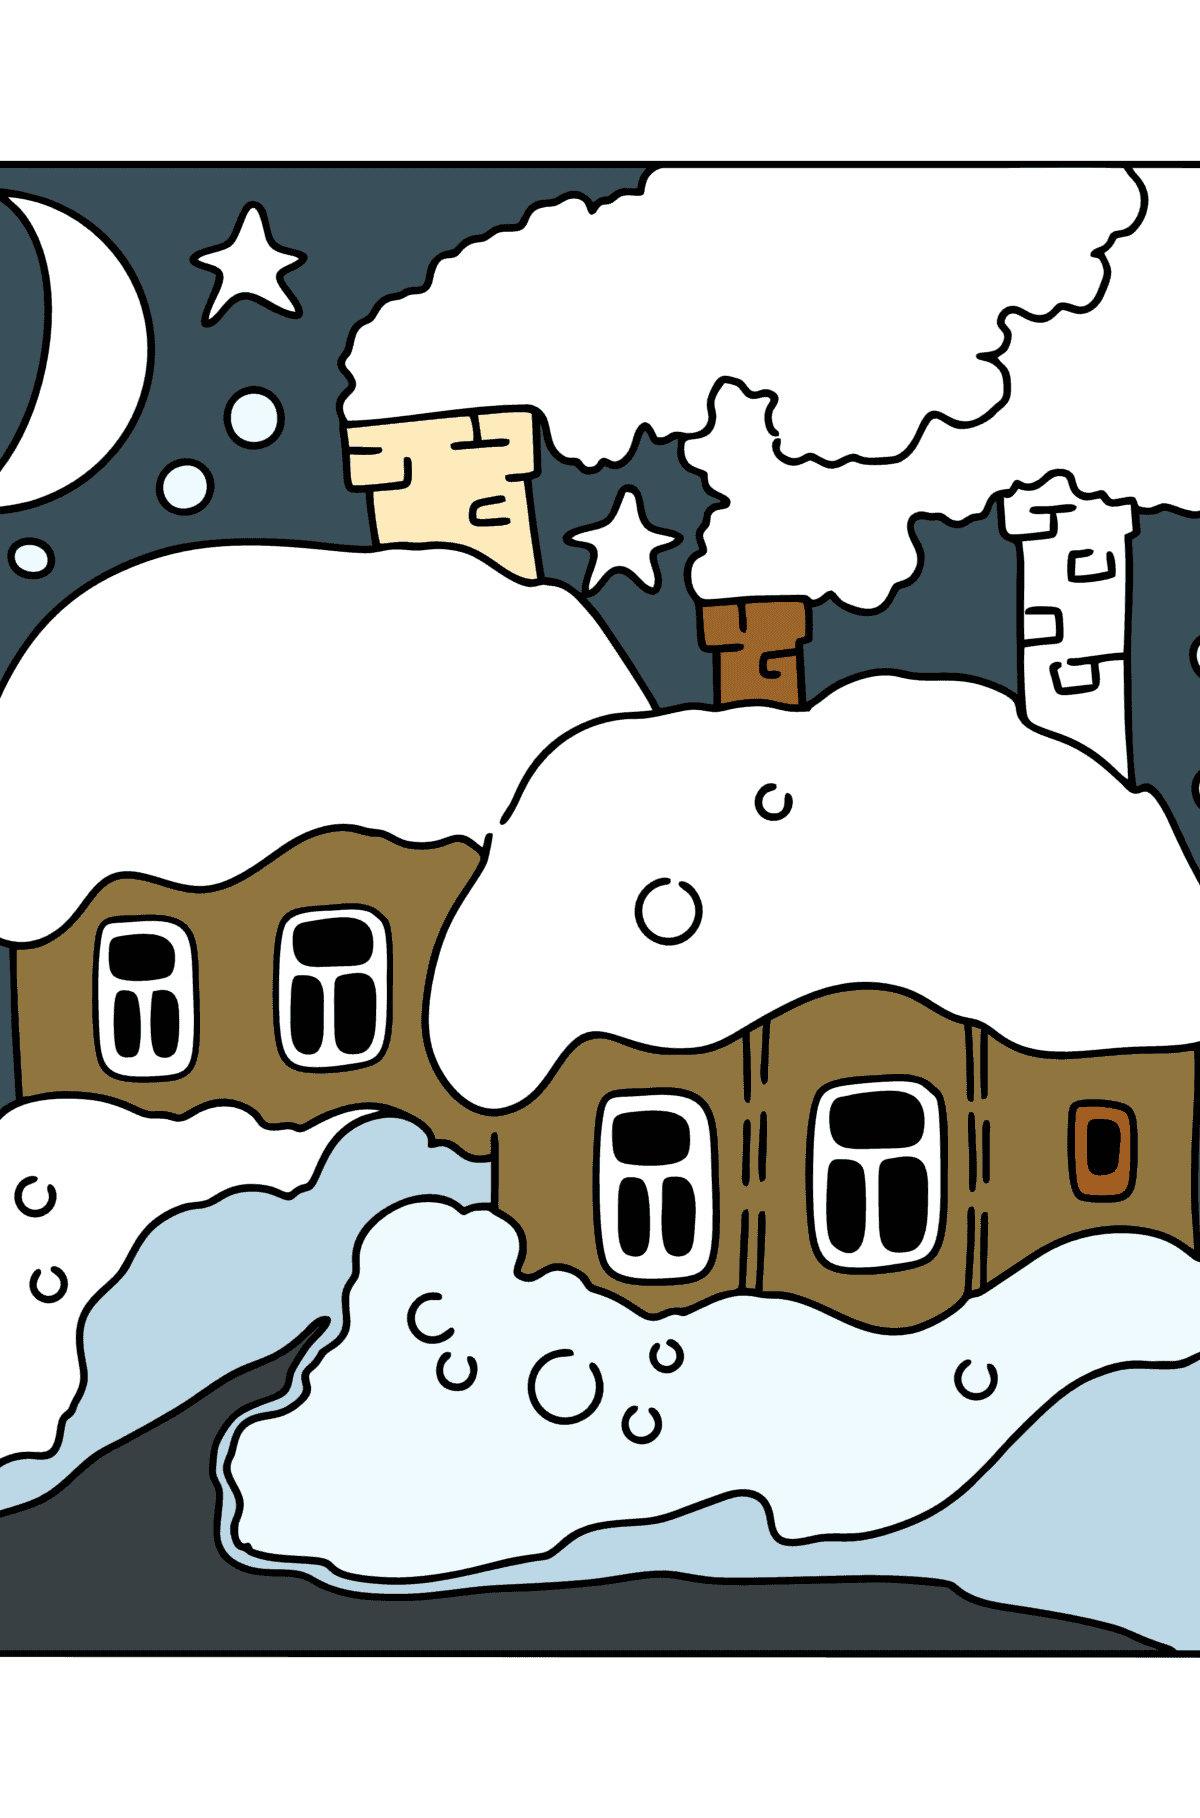 Coloring page - Winter Night - Coloring Pages for Kids